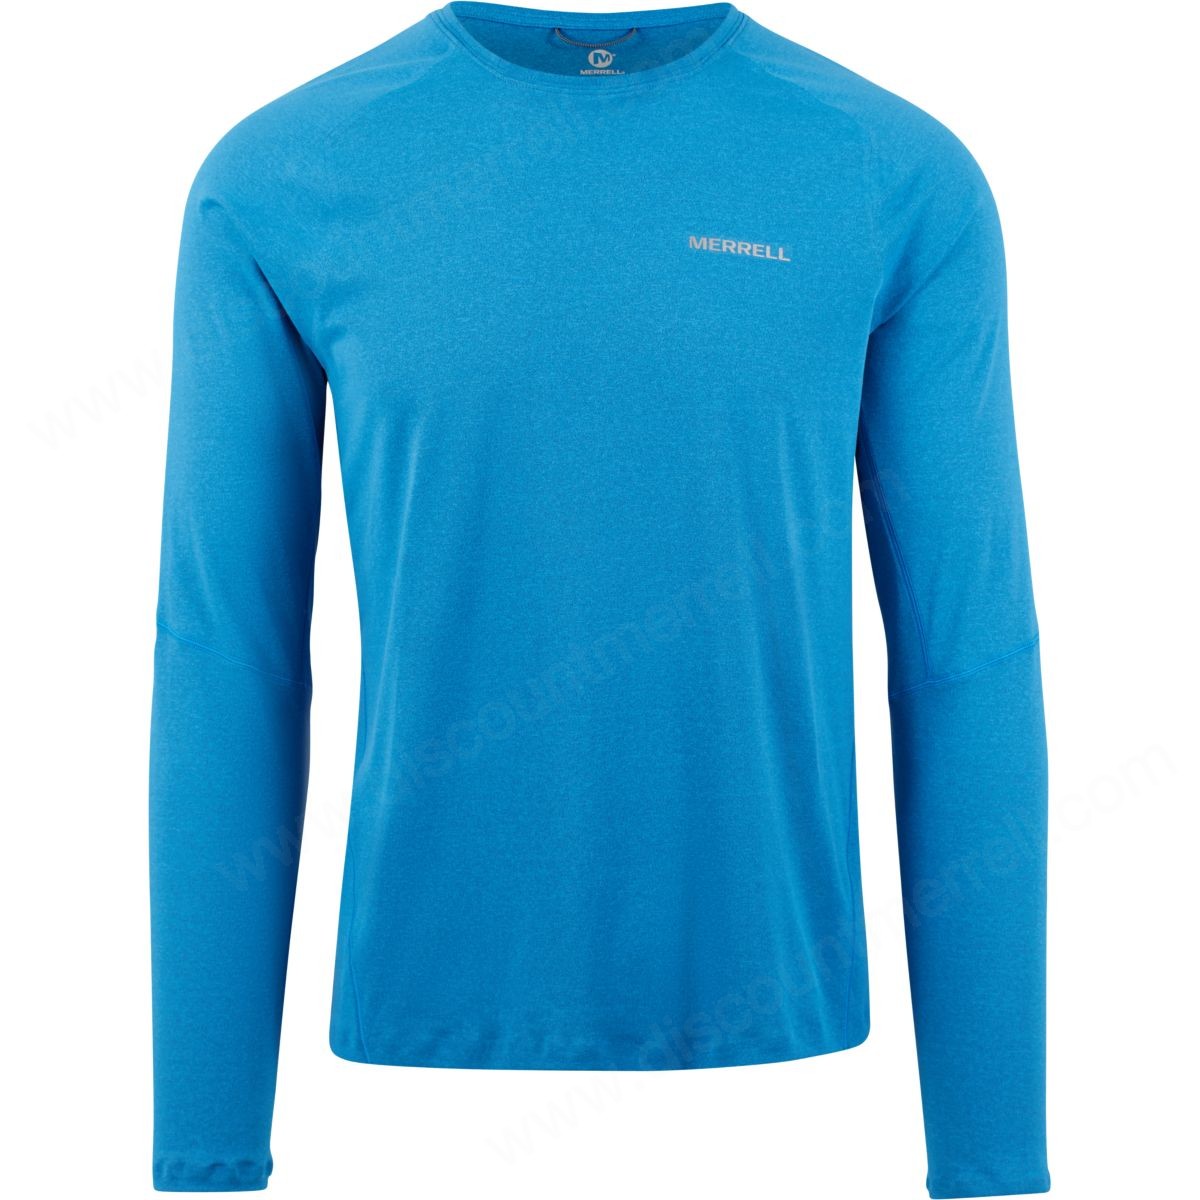 Merrell Men's Long Sleeve Tech Tshirts With Power Dry® Fabric French Blue - Merrell Men's Long Sleeve Tech Tshirts With Power Dry® Fabric French Blue